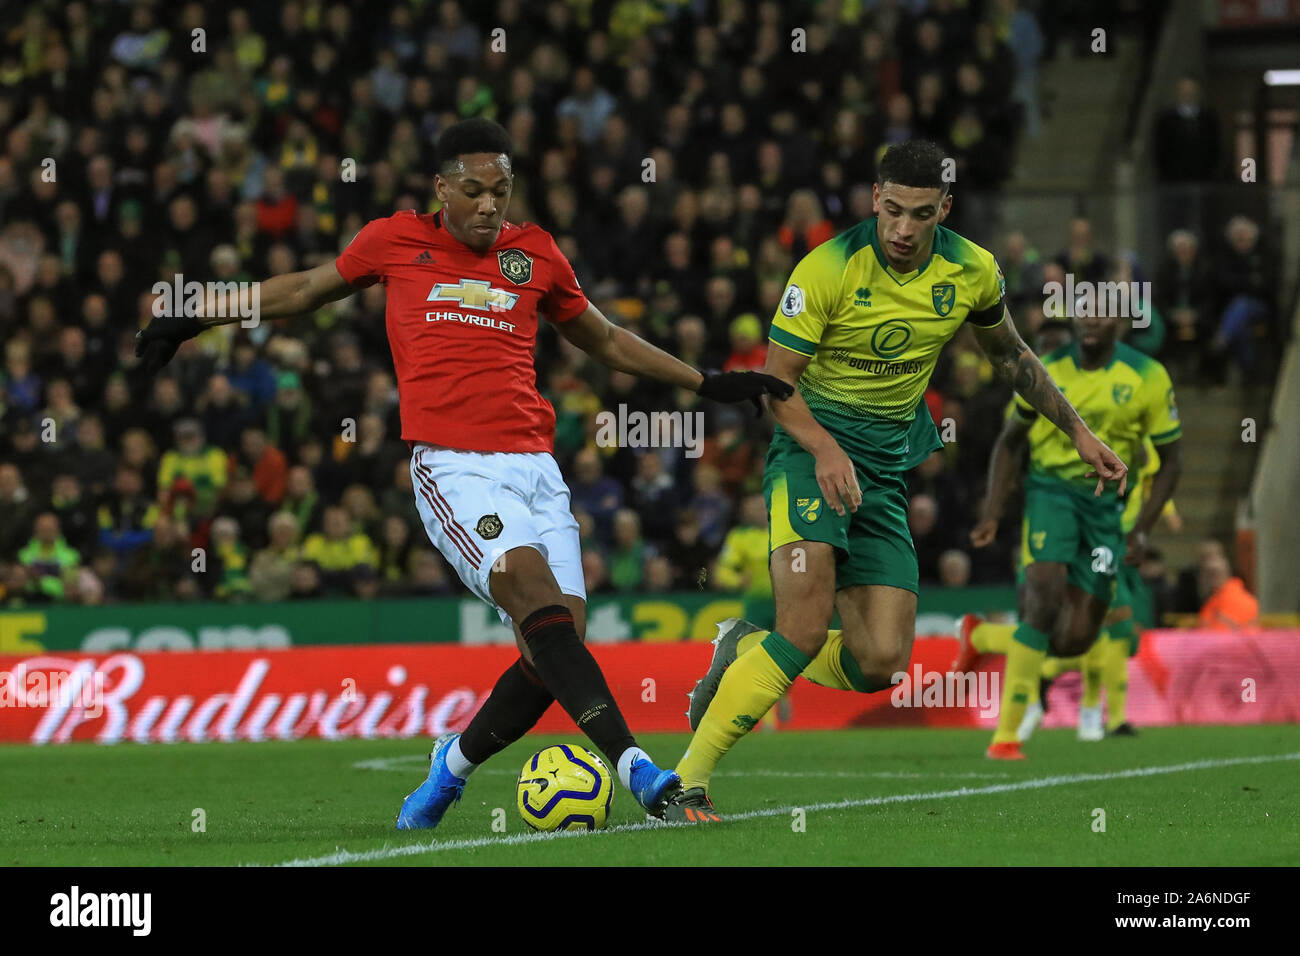 27th October 2019, Carrow Road, Norwich, England; Premier League, Norwich City v Manchester United : Anthony Martial (9) of Manchester United with the ball  Credit: Mark Cosgrove/News Images Stock Photo